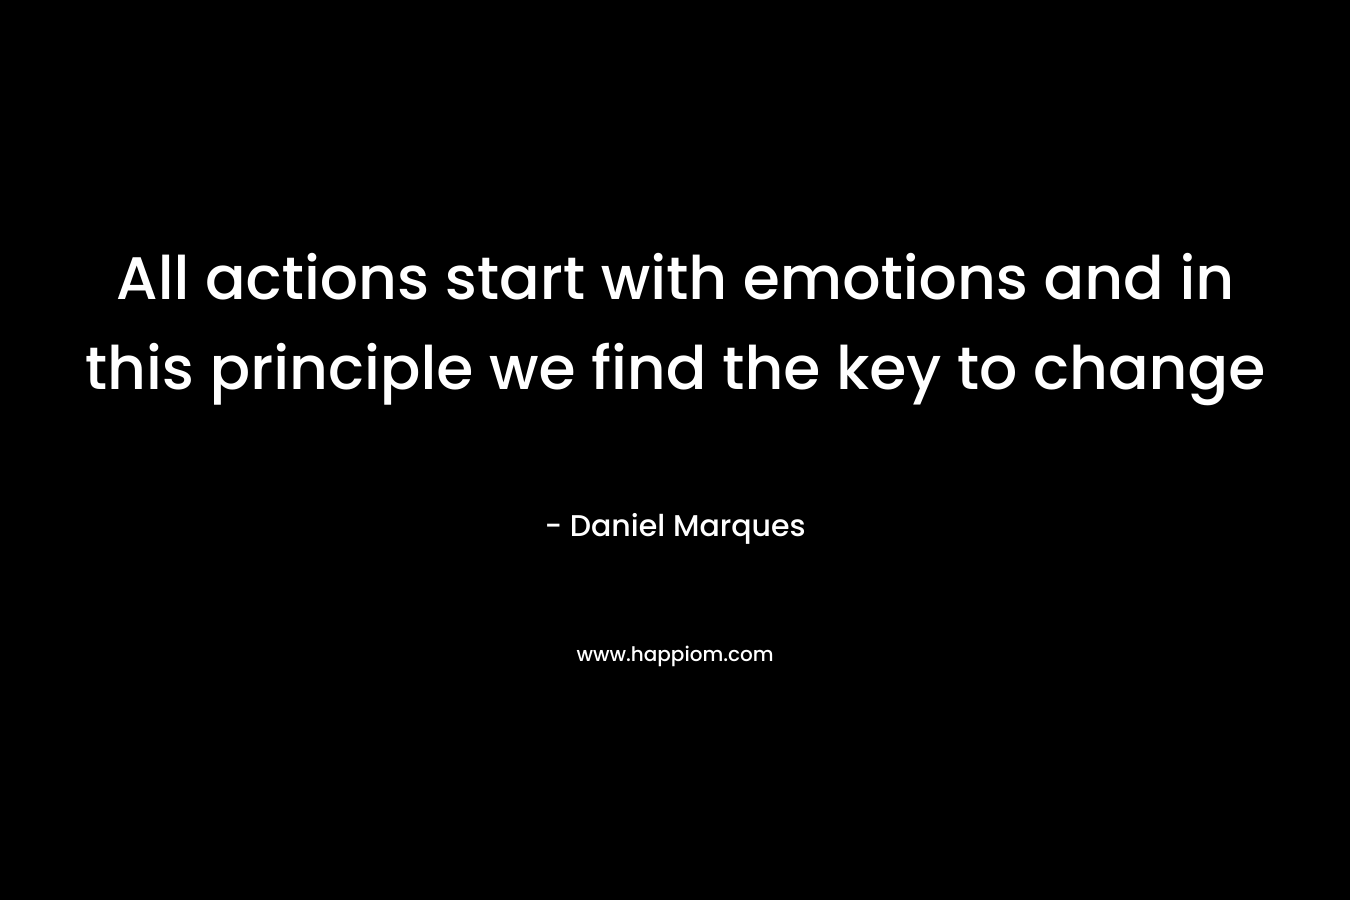 All actions start with emotions and in this principle we find the key to change – Daniel Marques